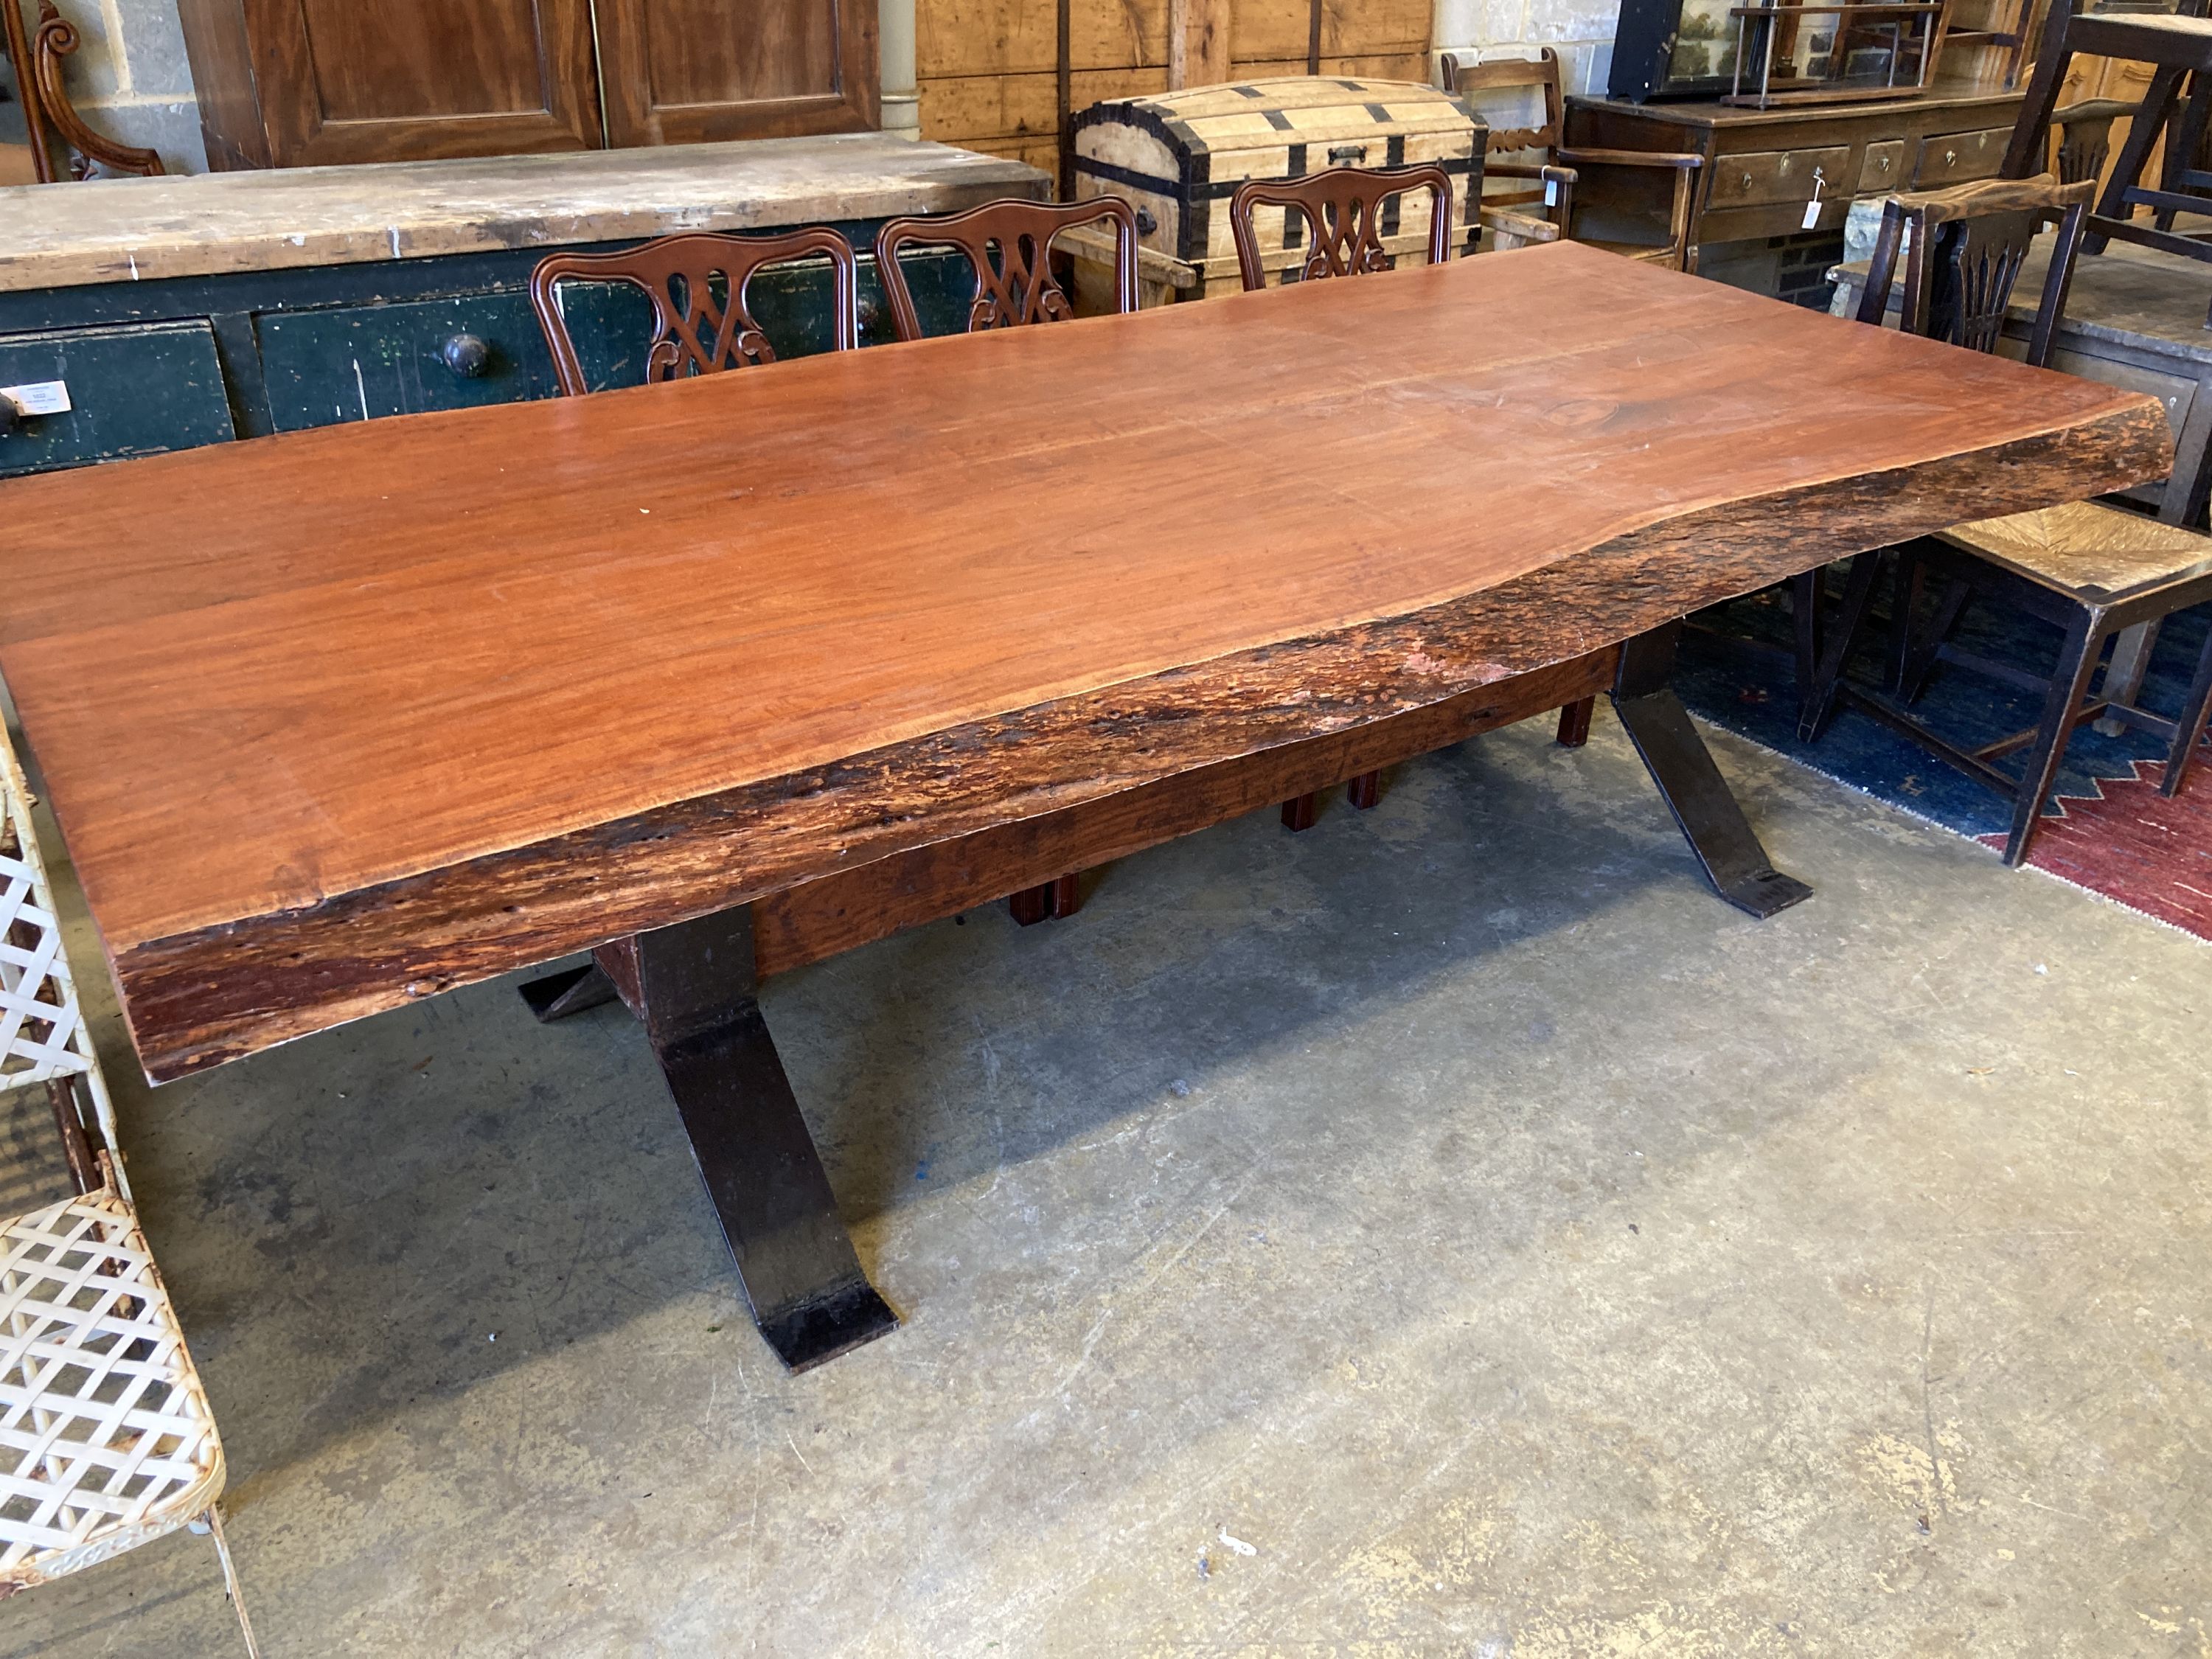 A South African Camelthorn hardwood dining table with a metal x-frame base, length 256cm, width 116cm, height 78cm